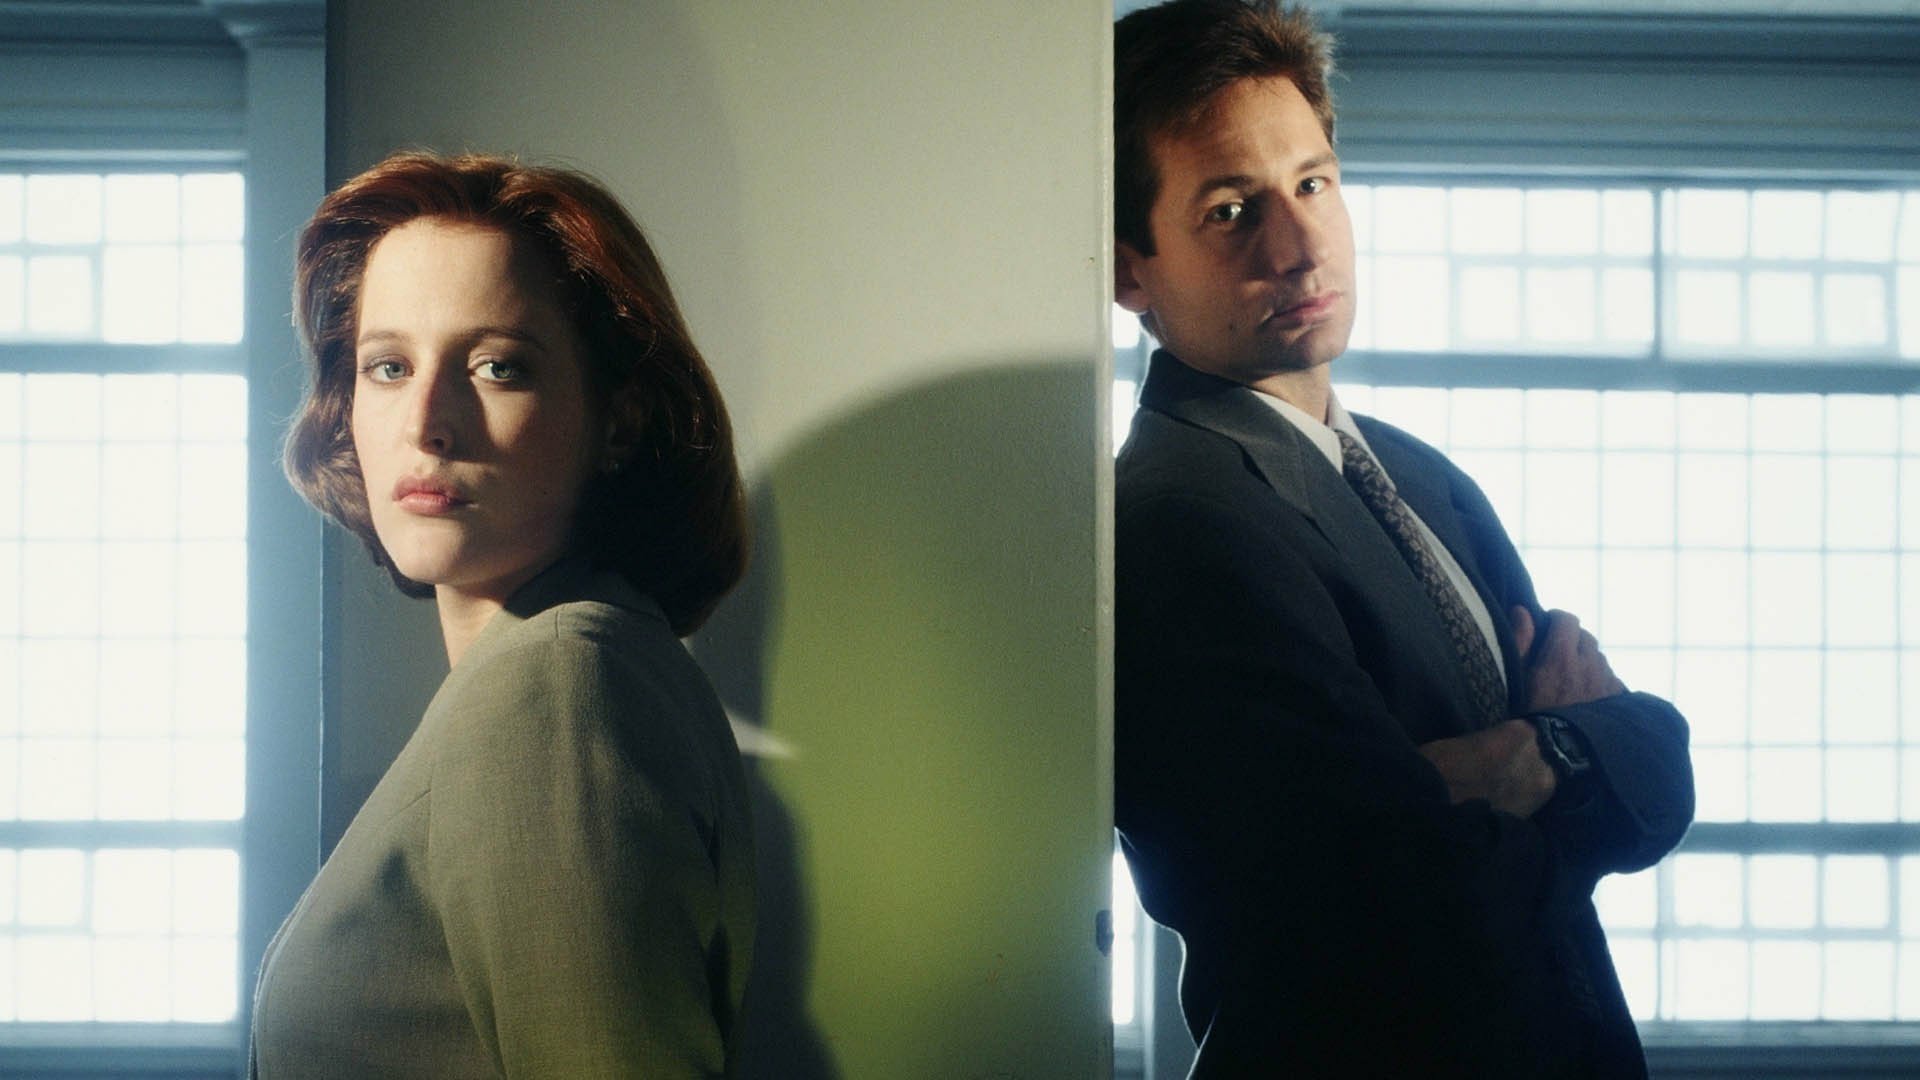 1920x1080 The X-Files Wallpaper Background Image. 